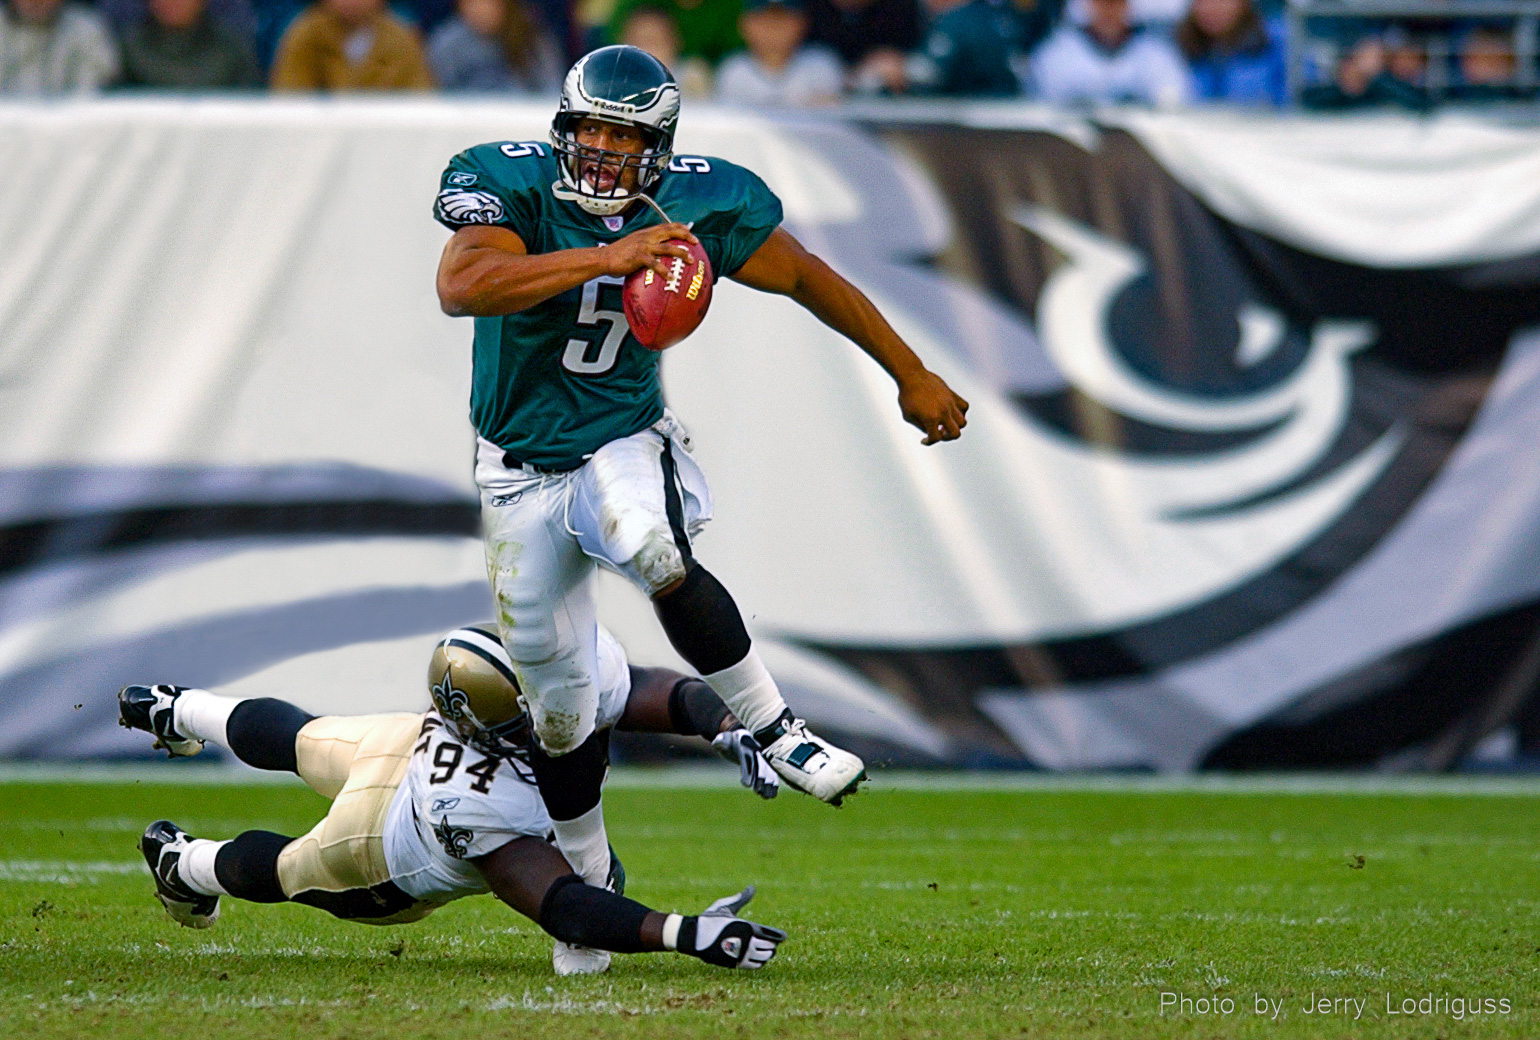 Eagles Donovan McNabb eludes the grasp of the Saints Charles Grant as he races upfield looking for a first down during the Eagels 33-20 win in Philadelphia on Sunday November 23, 2003.